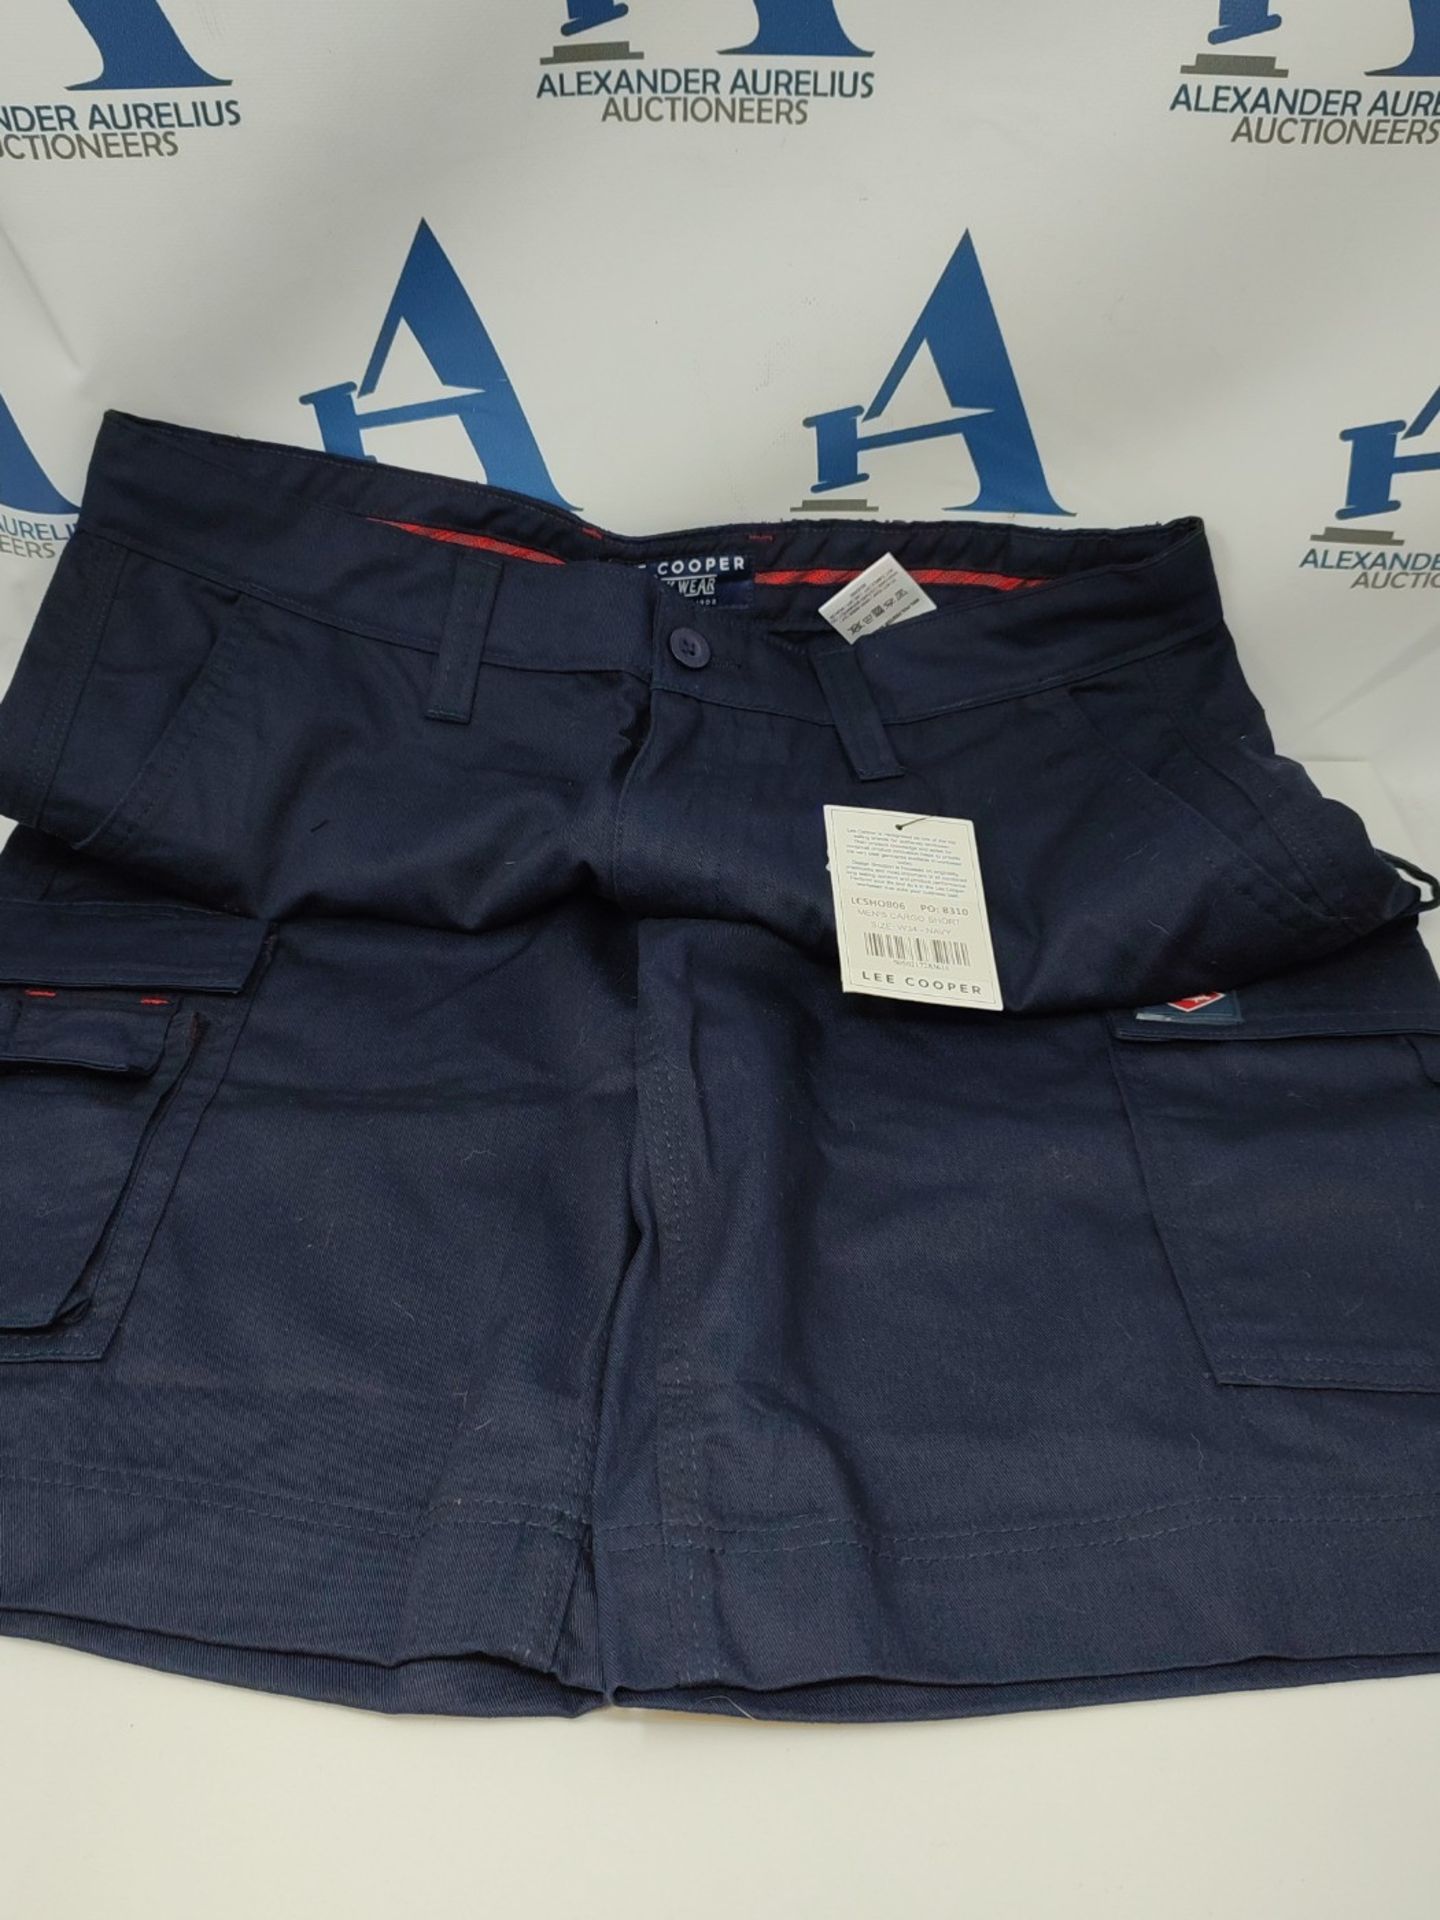 Lee Cooper Classic Multi Pocket Cargo Heavy Duty Easy Care Workwear Shorts, Navy, 34W - Image 2 of 3